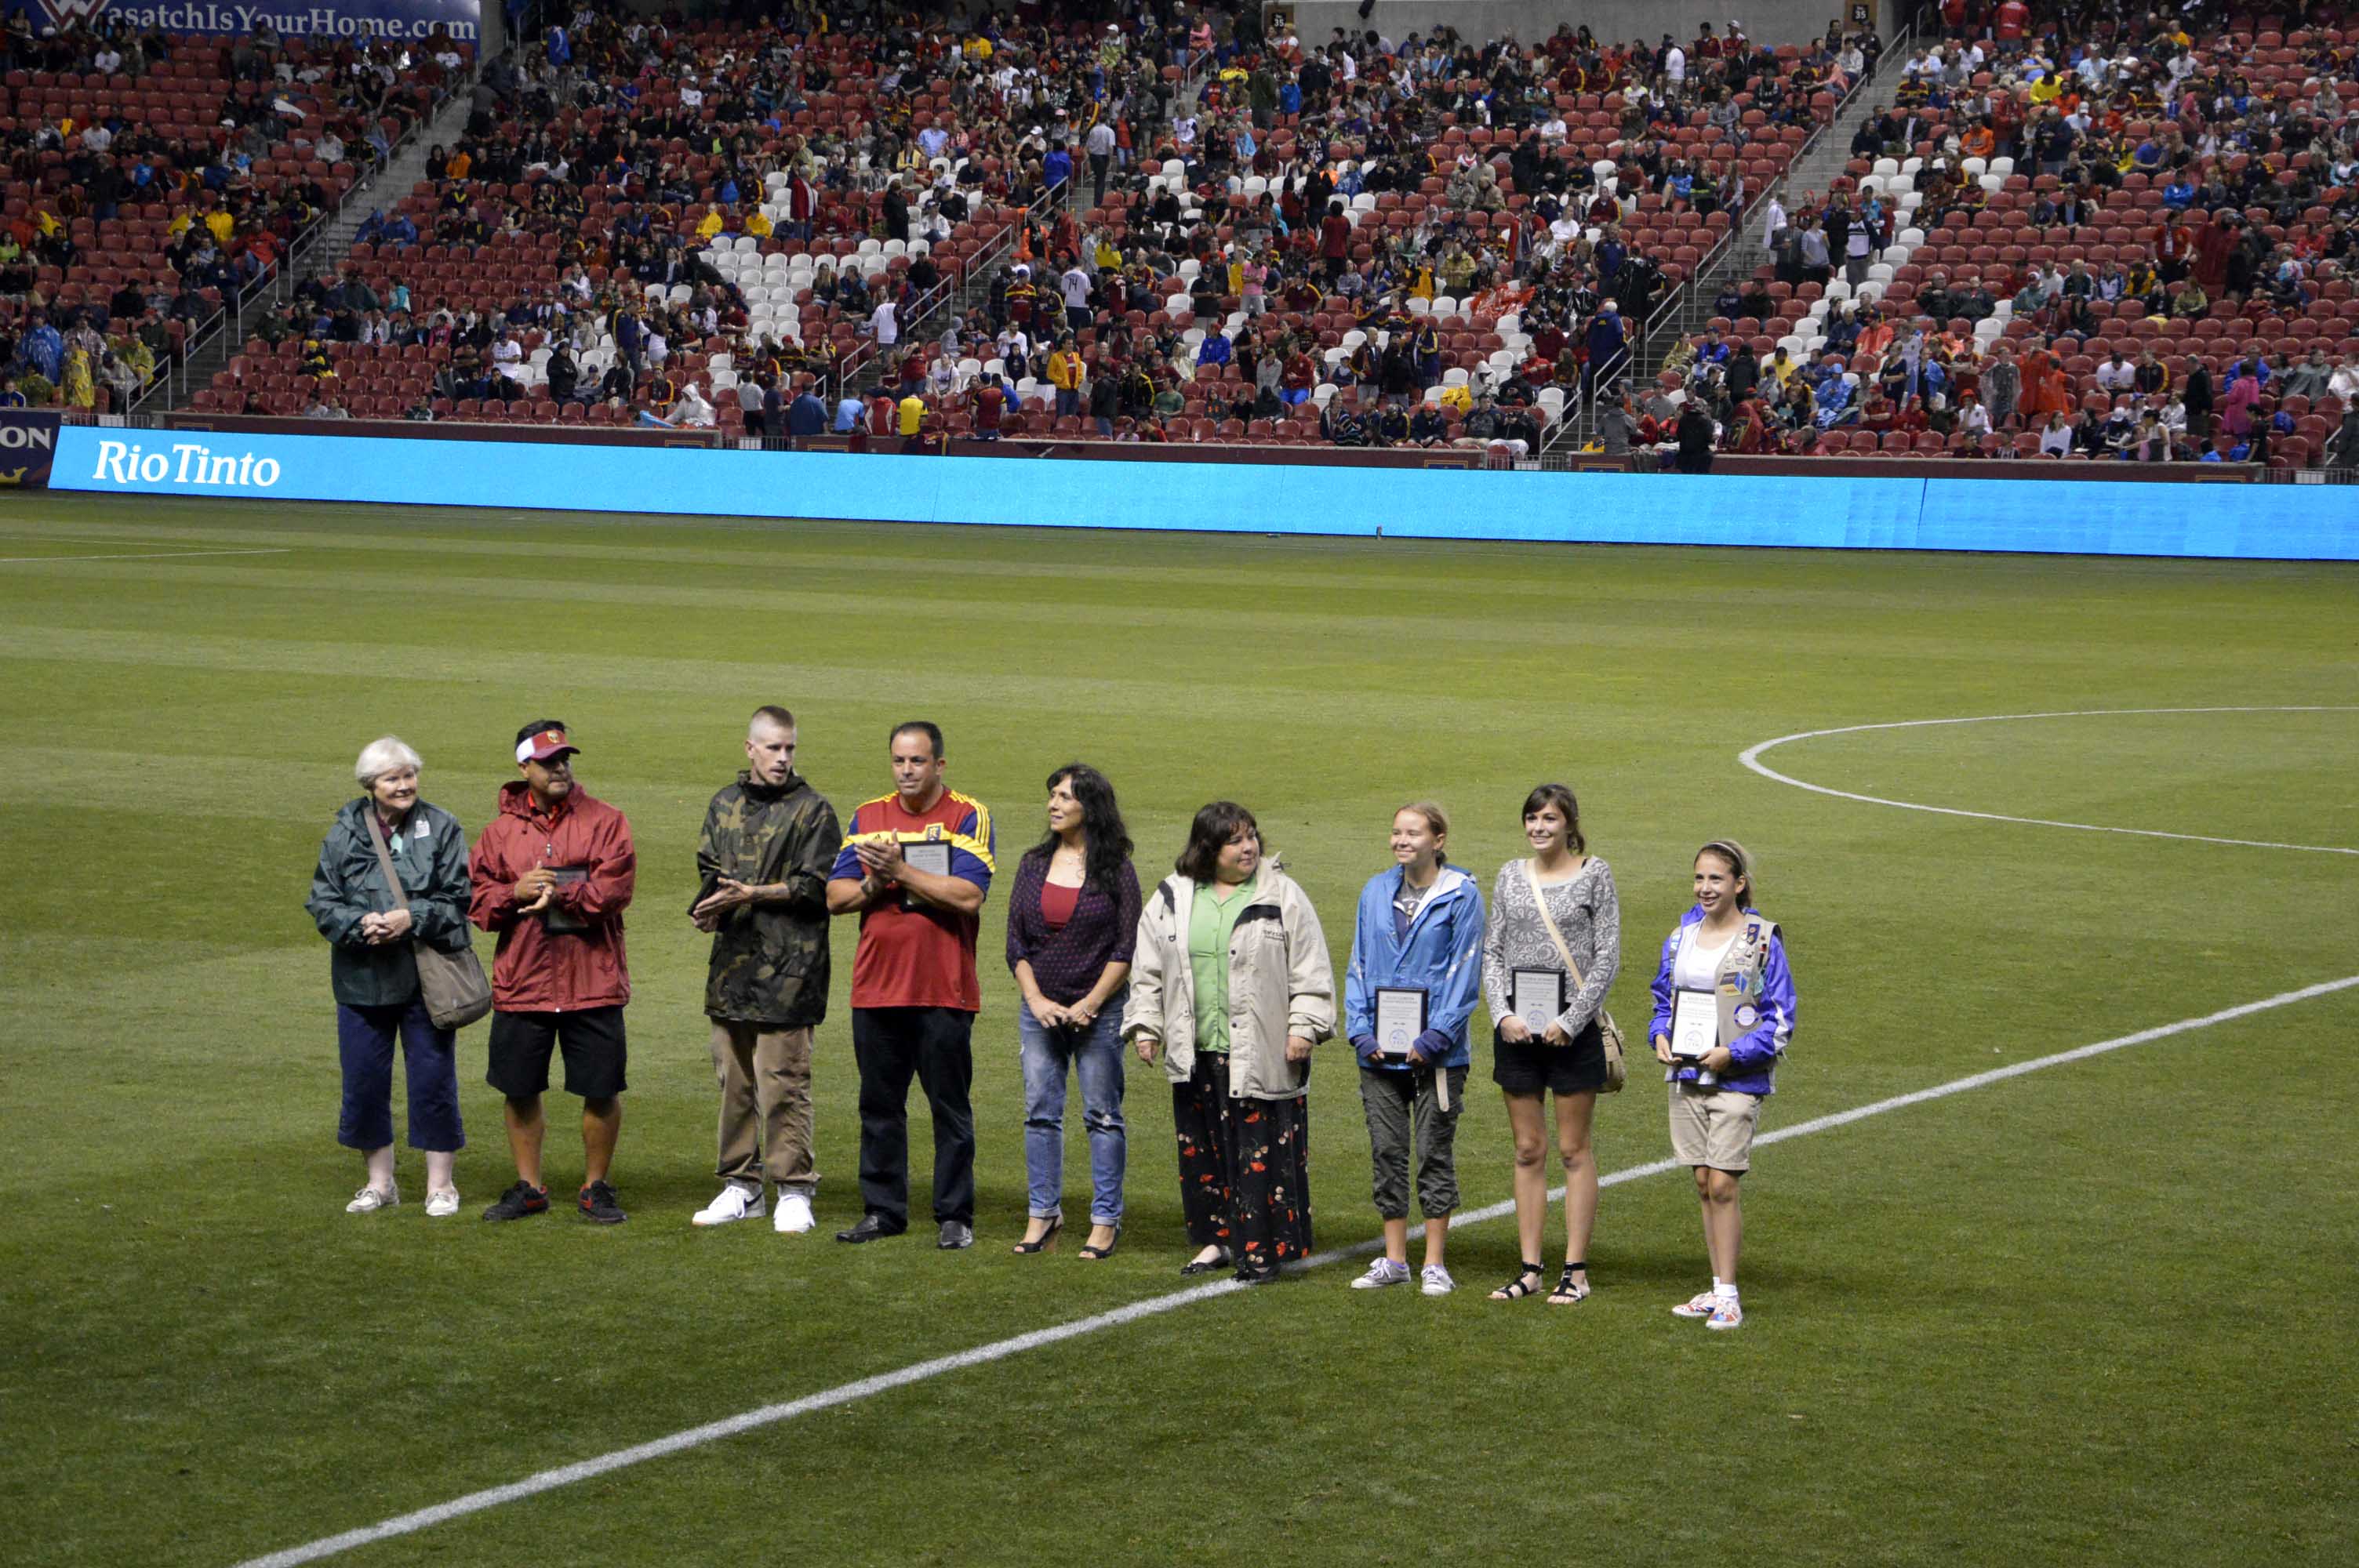 Teachers, students recognized at Real Salt Lake match during halftime